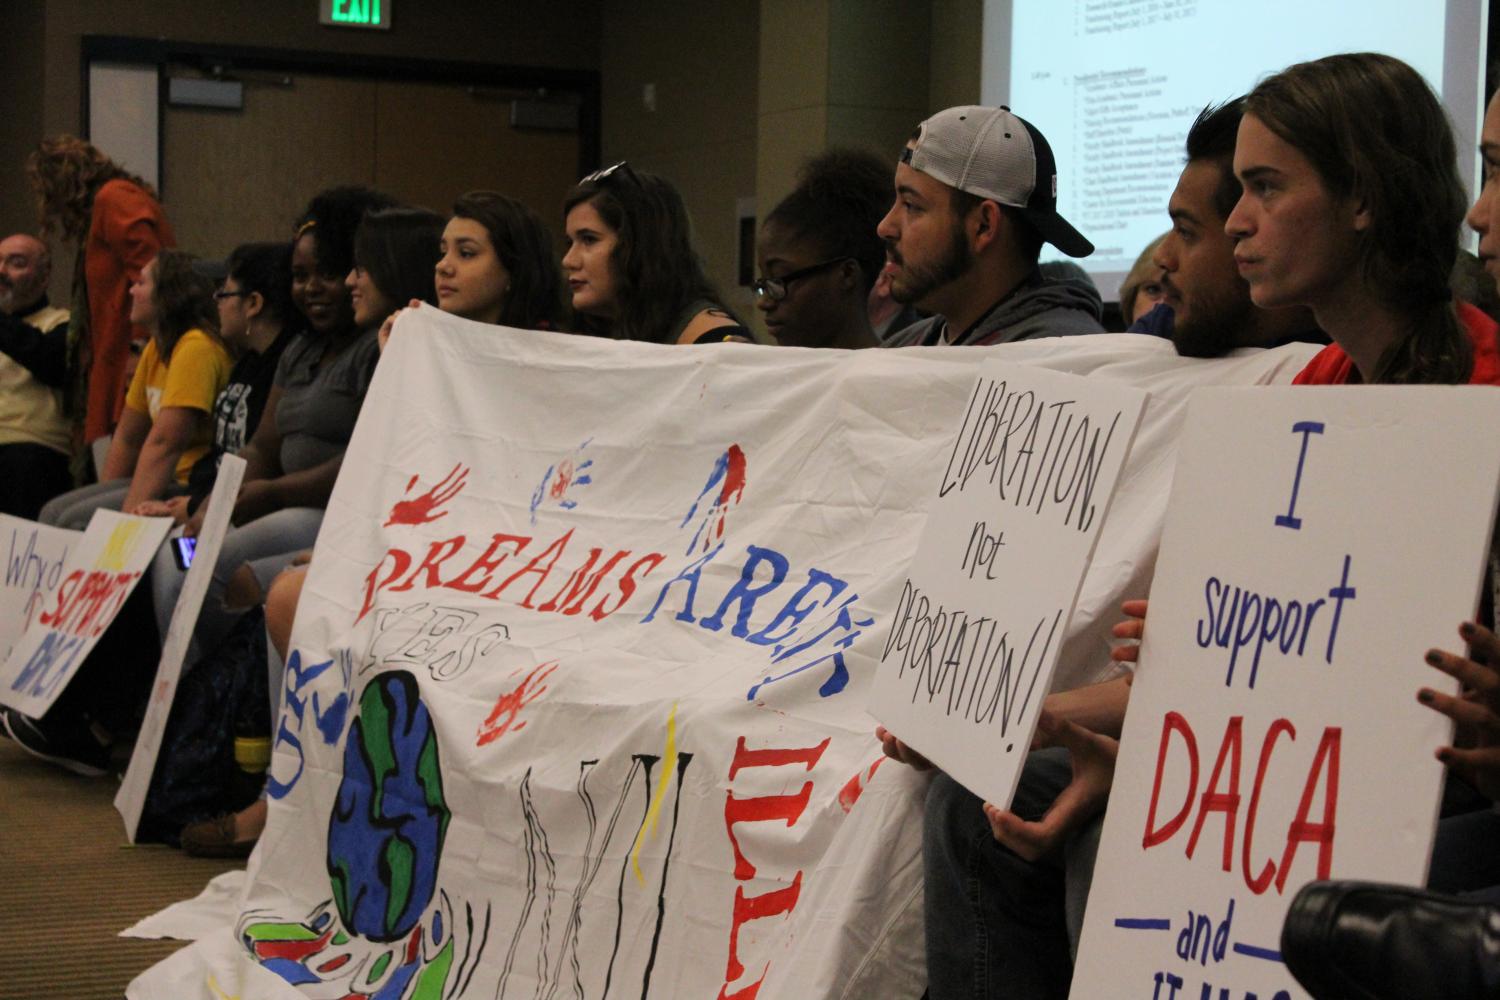 Students+gathered+at+Board+of+Regents+in+support+of+DACA.+